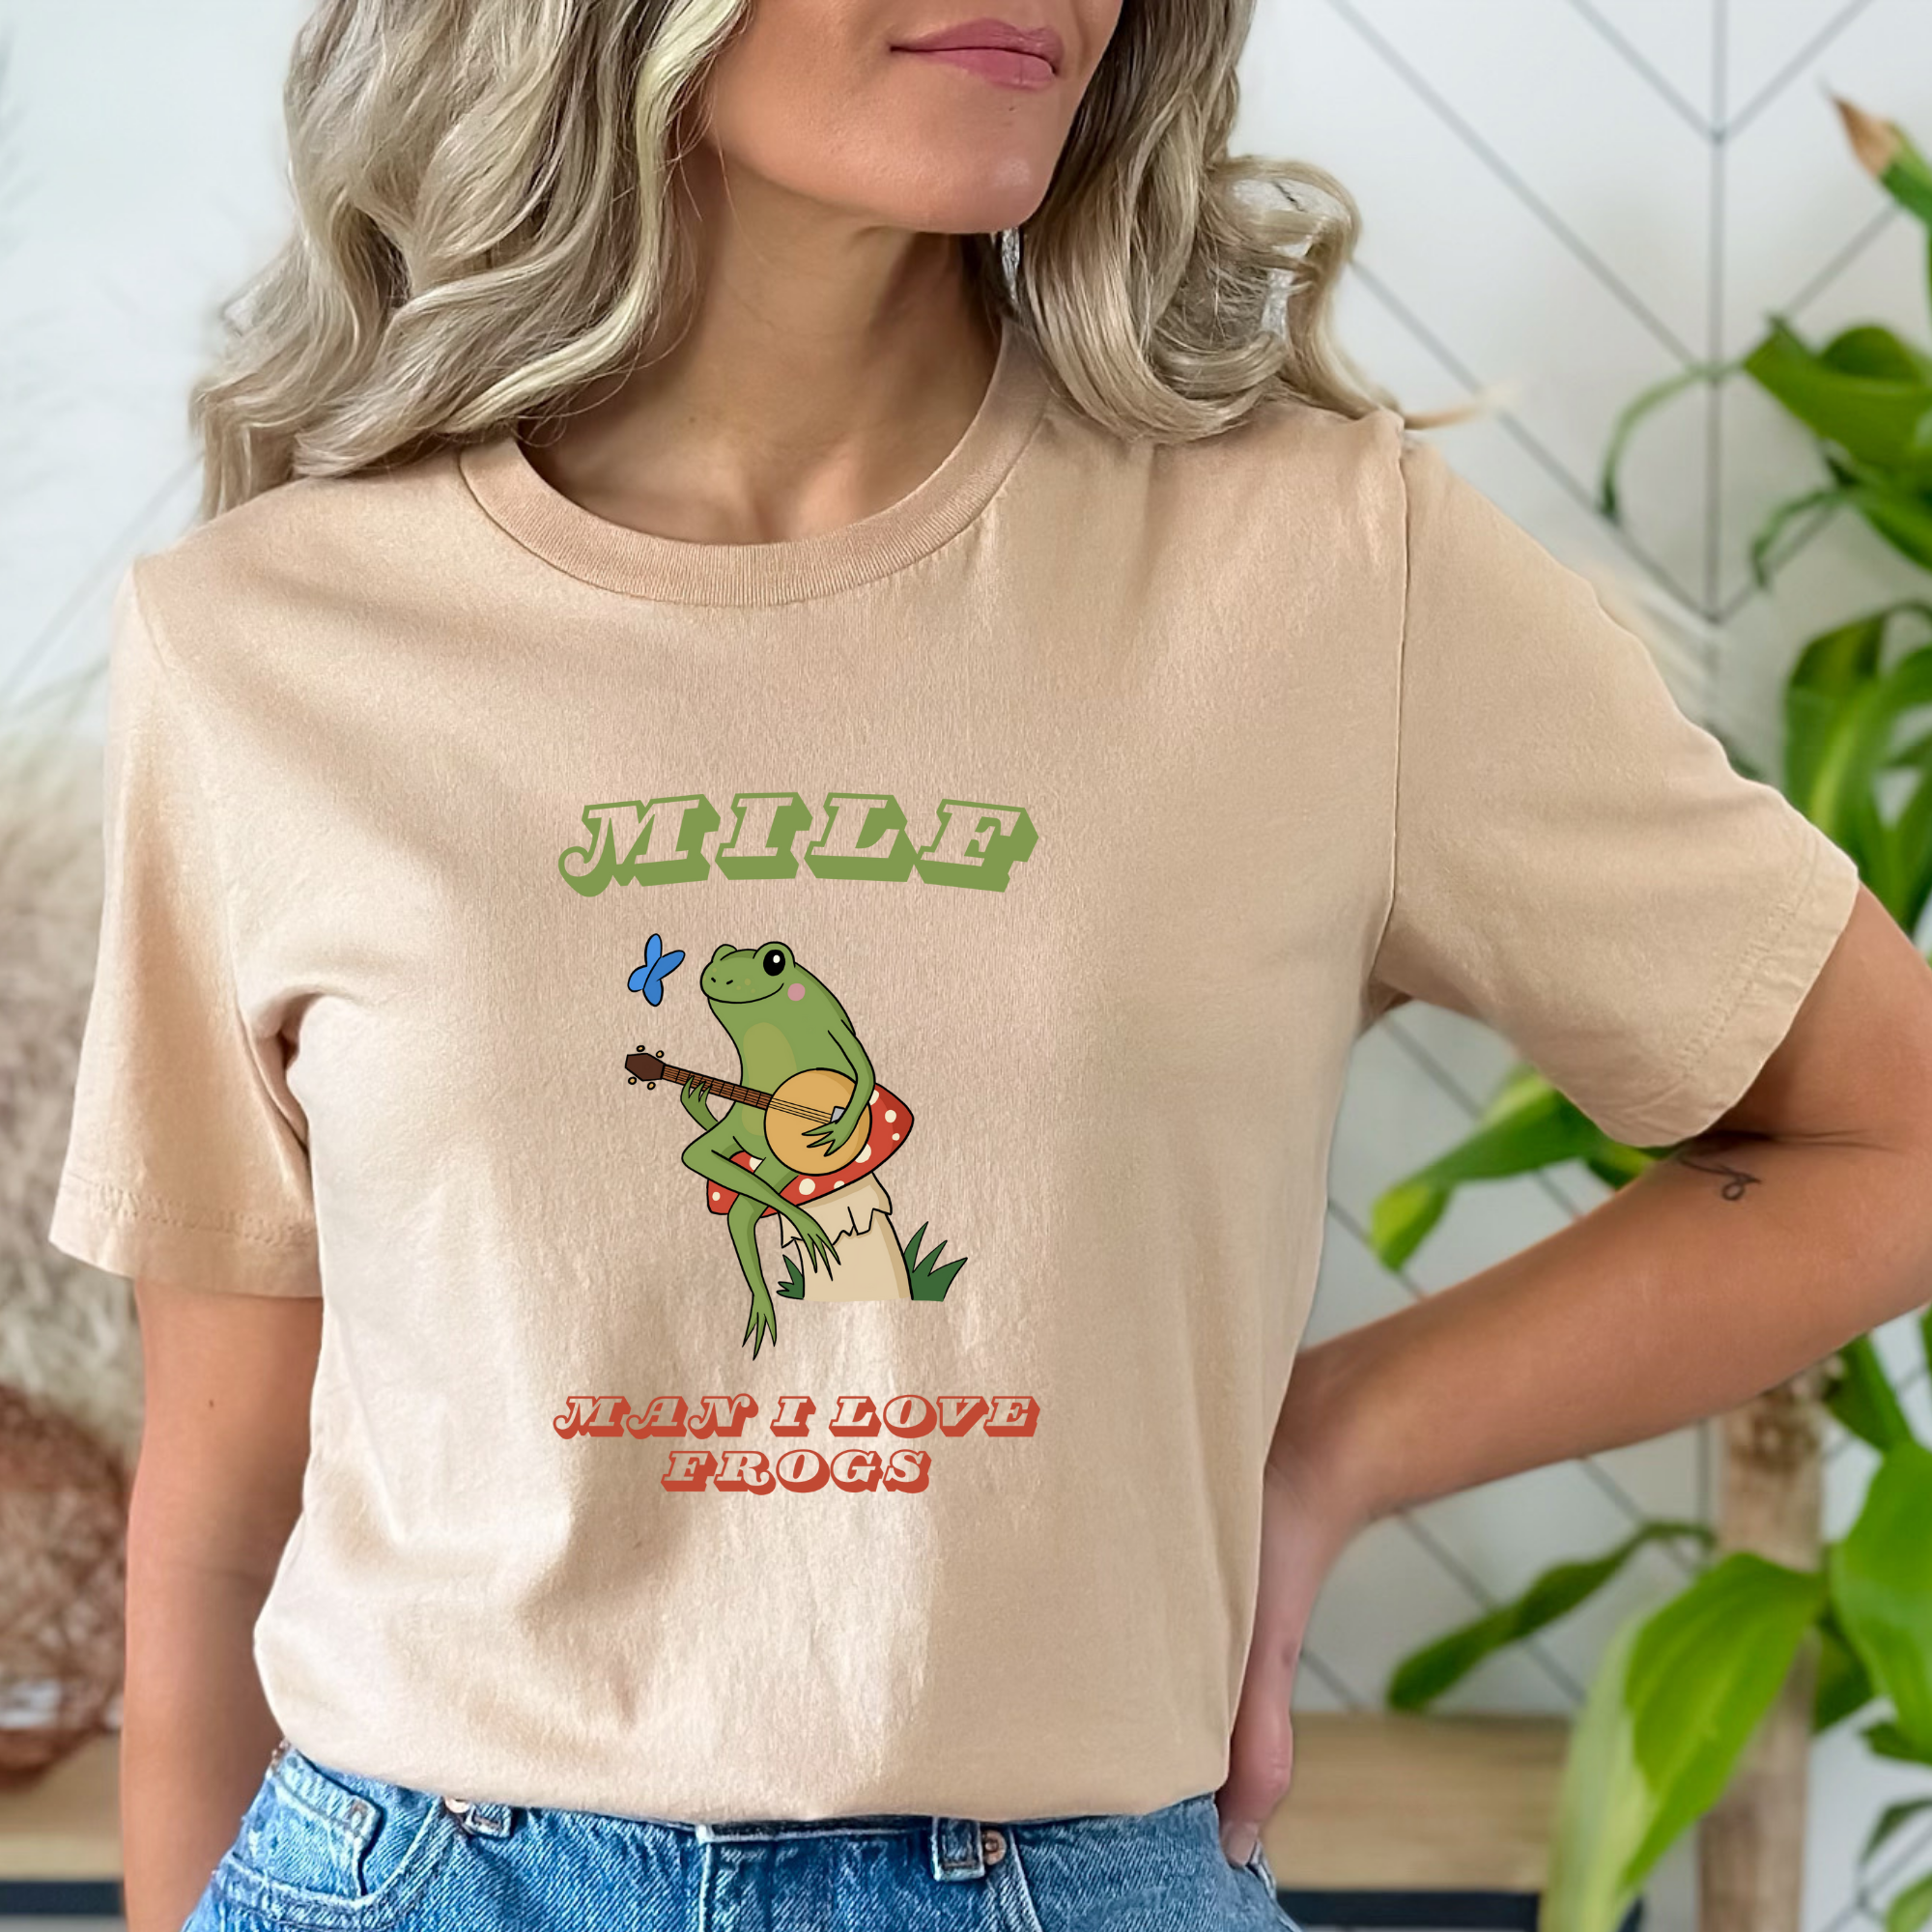 Retro Frog Shirt, Funny MILF Froggy Shirt, Cottagecore Froggy Tee, Oversized UNISEX T-shirt, Toad Shirt, Frog Lover shirt, Man I love frogs